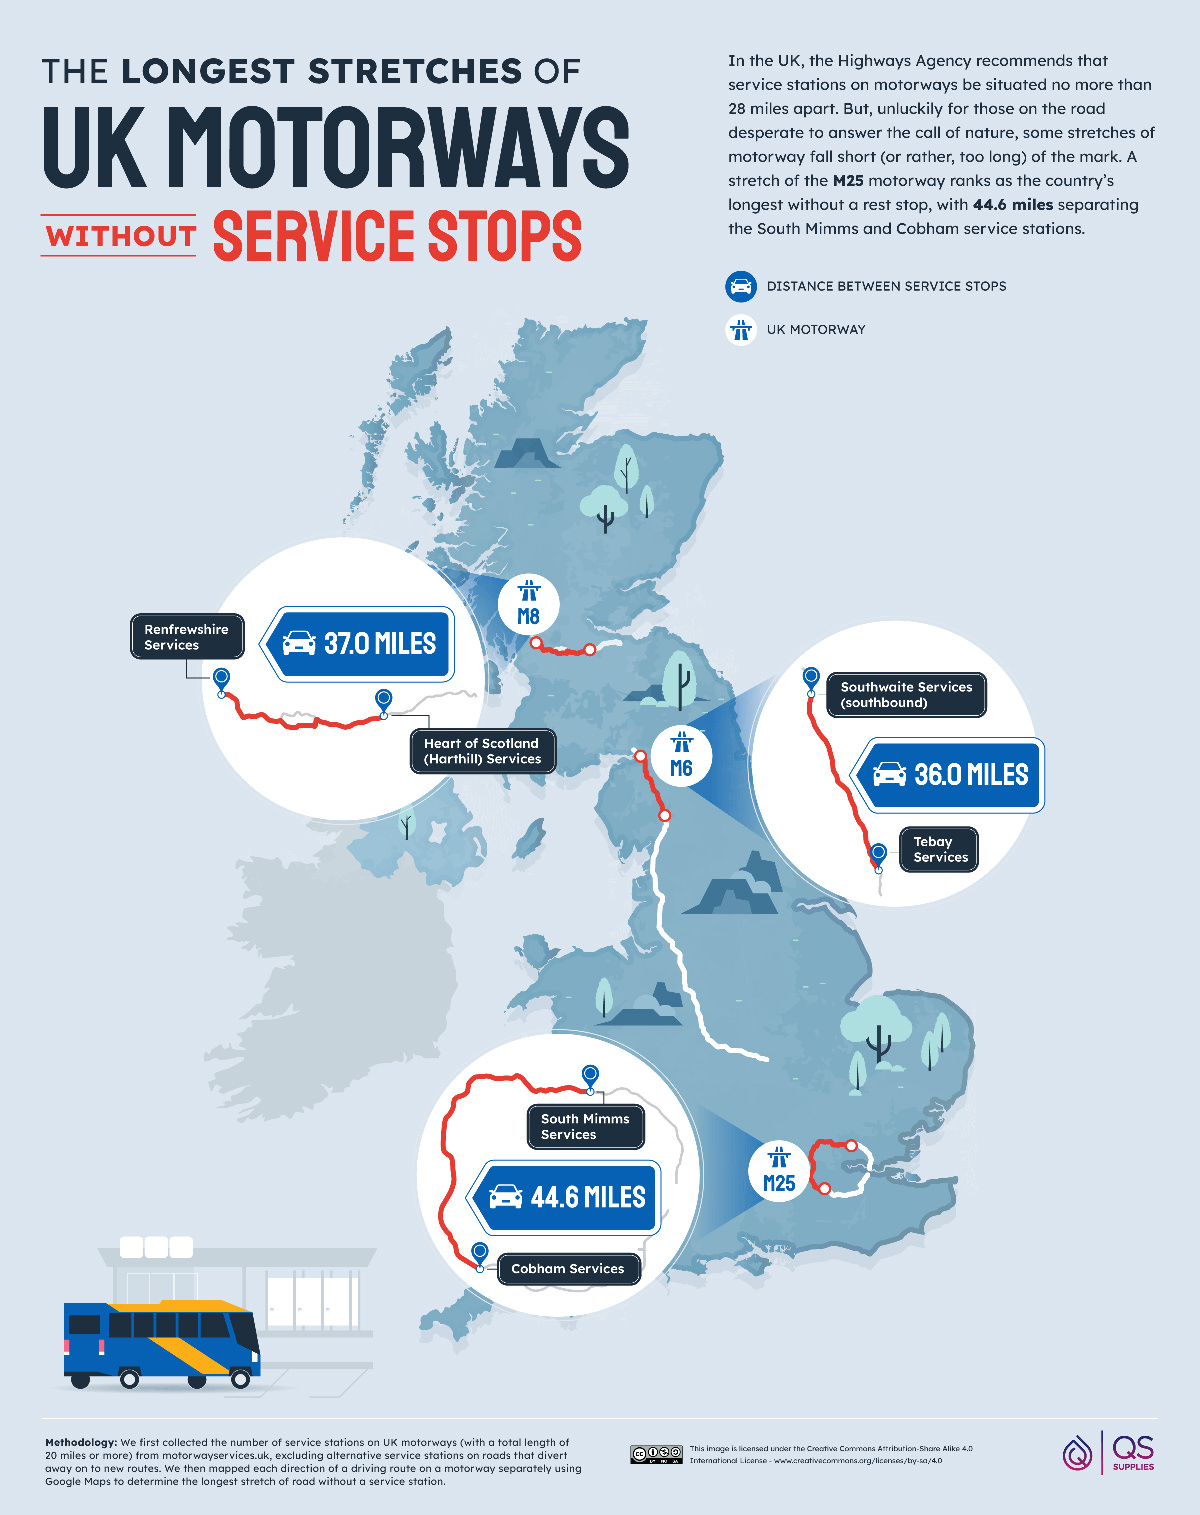 Longest Streches of UK Motorways Without Service Stops